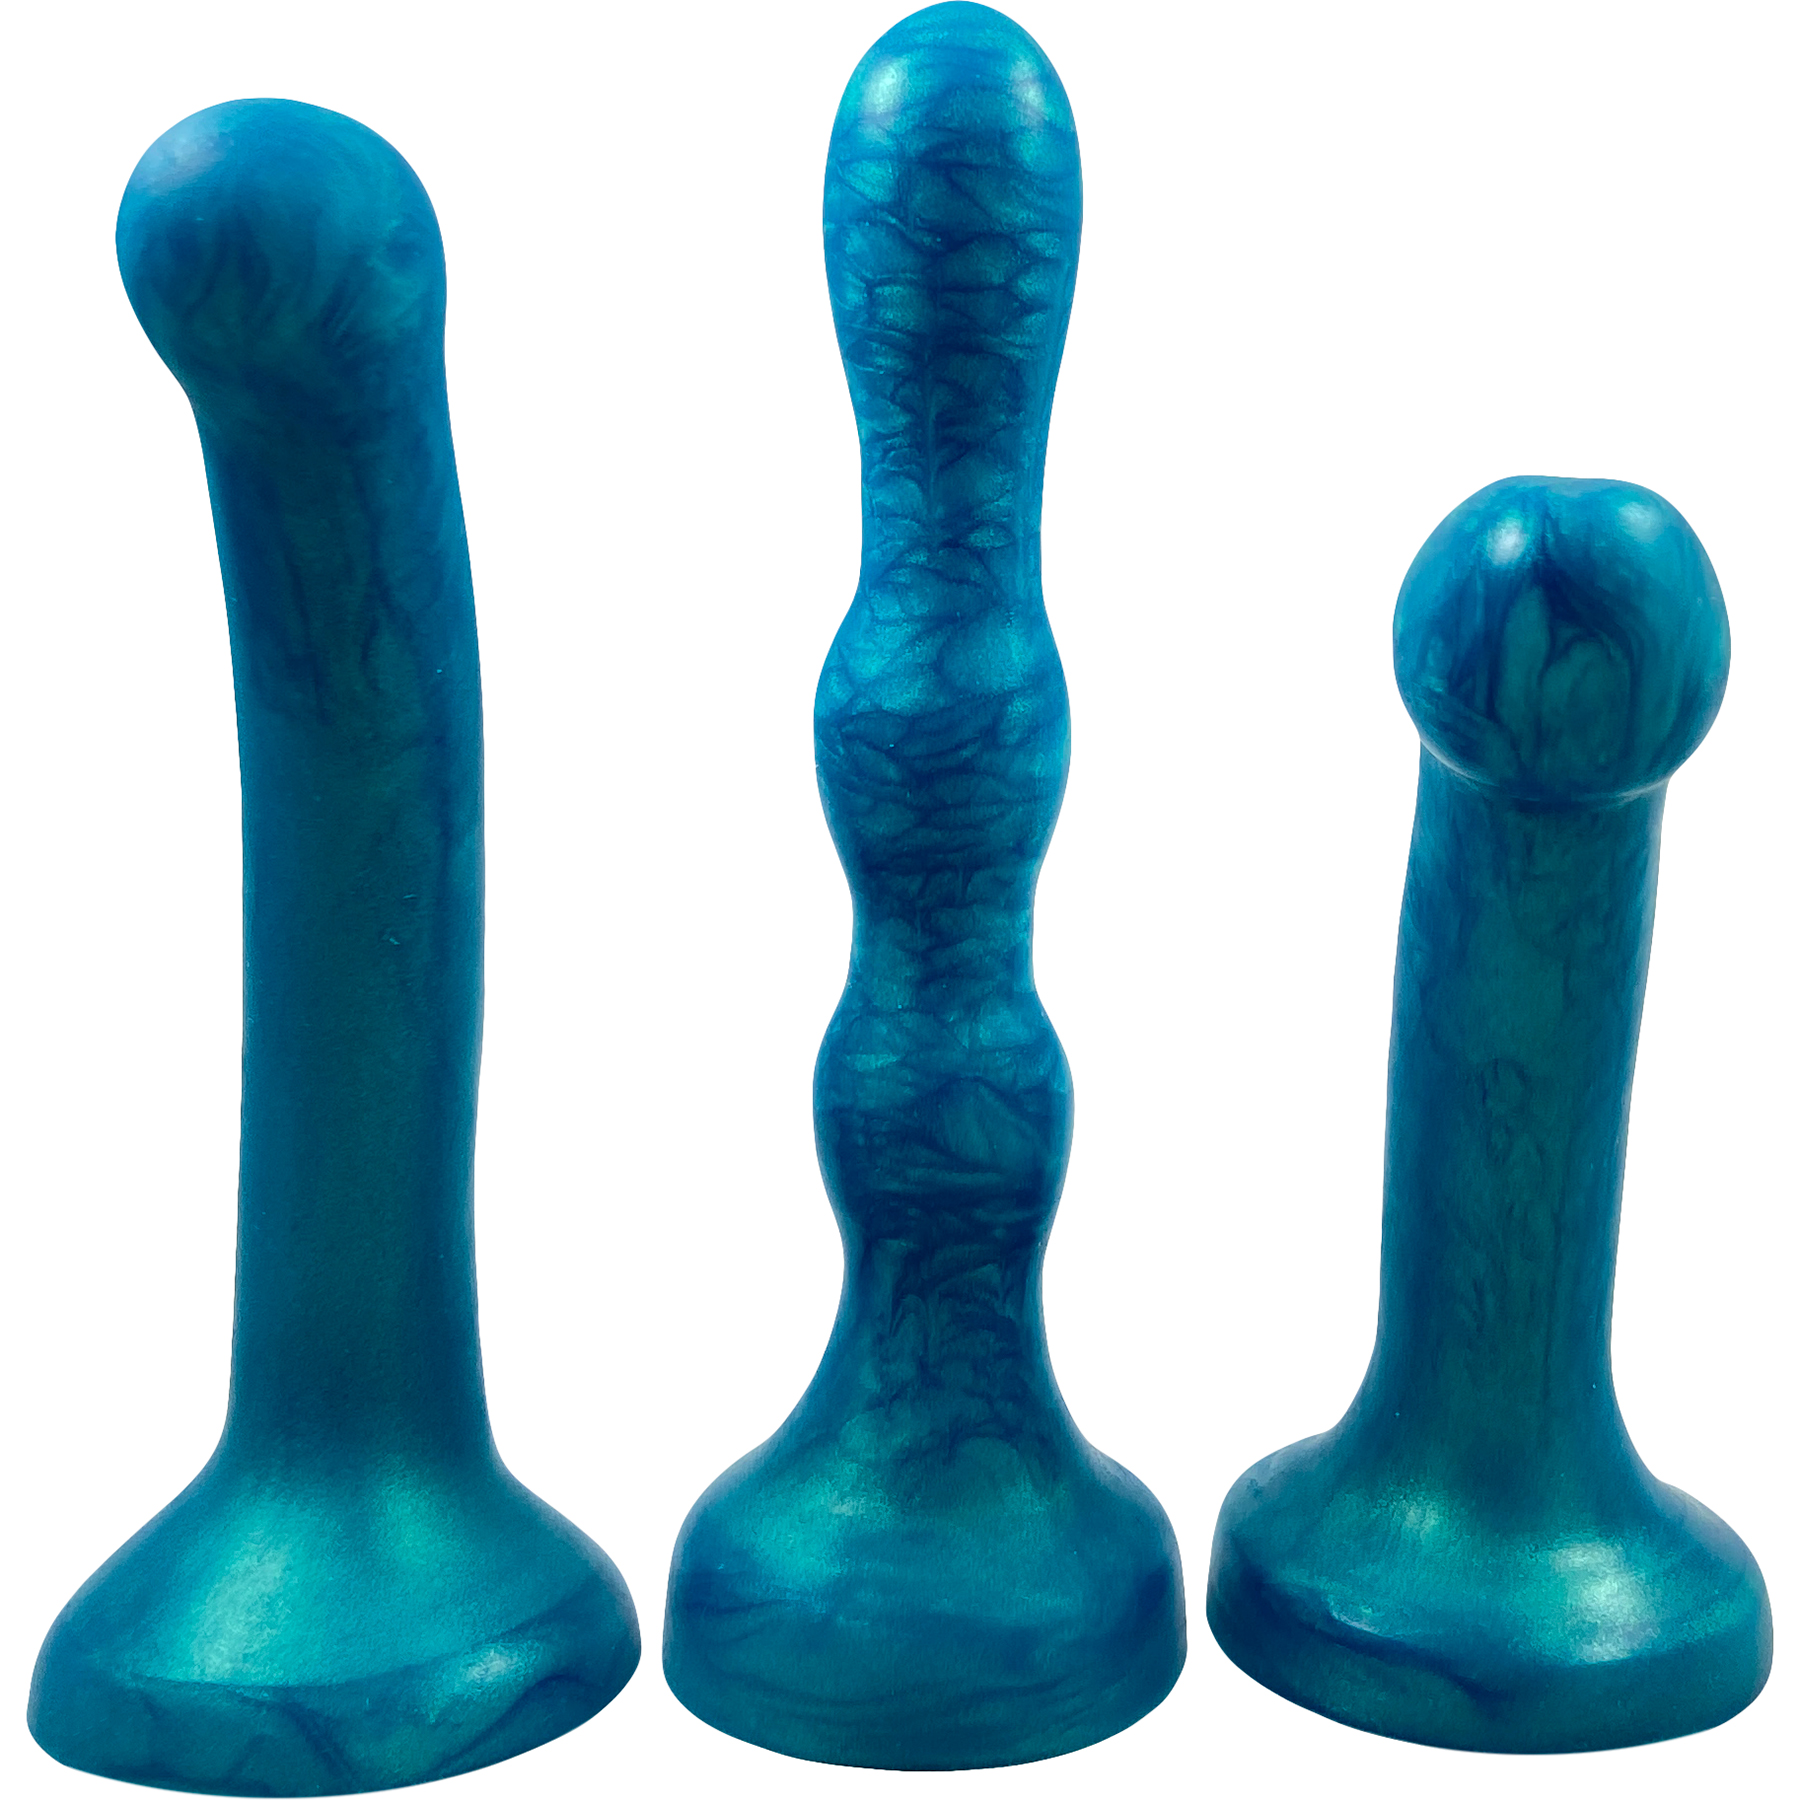 The Minima Small Silicone Dildo Set By Uberrime - All Three Side By Side